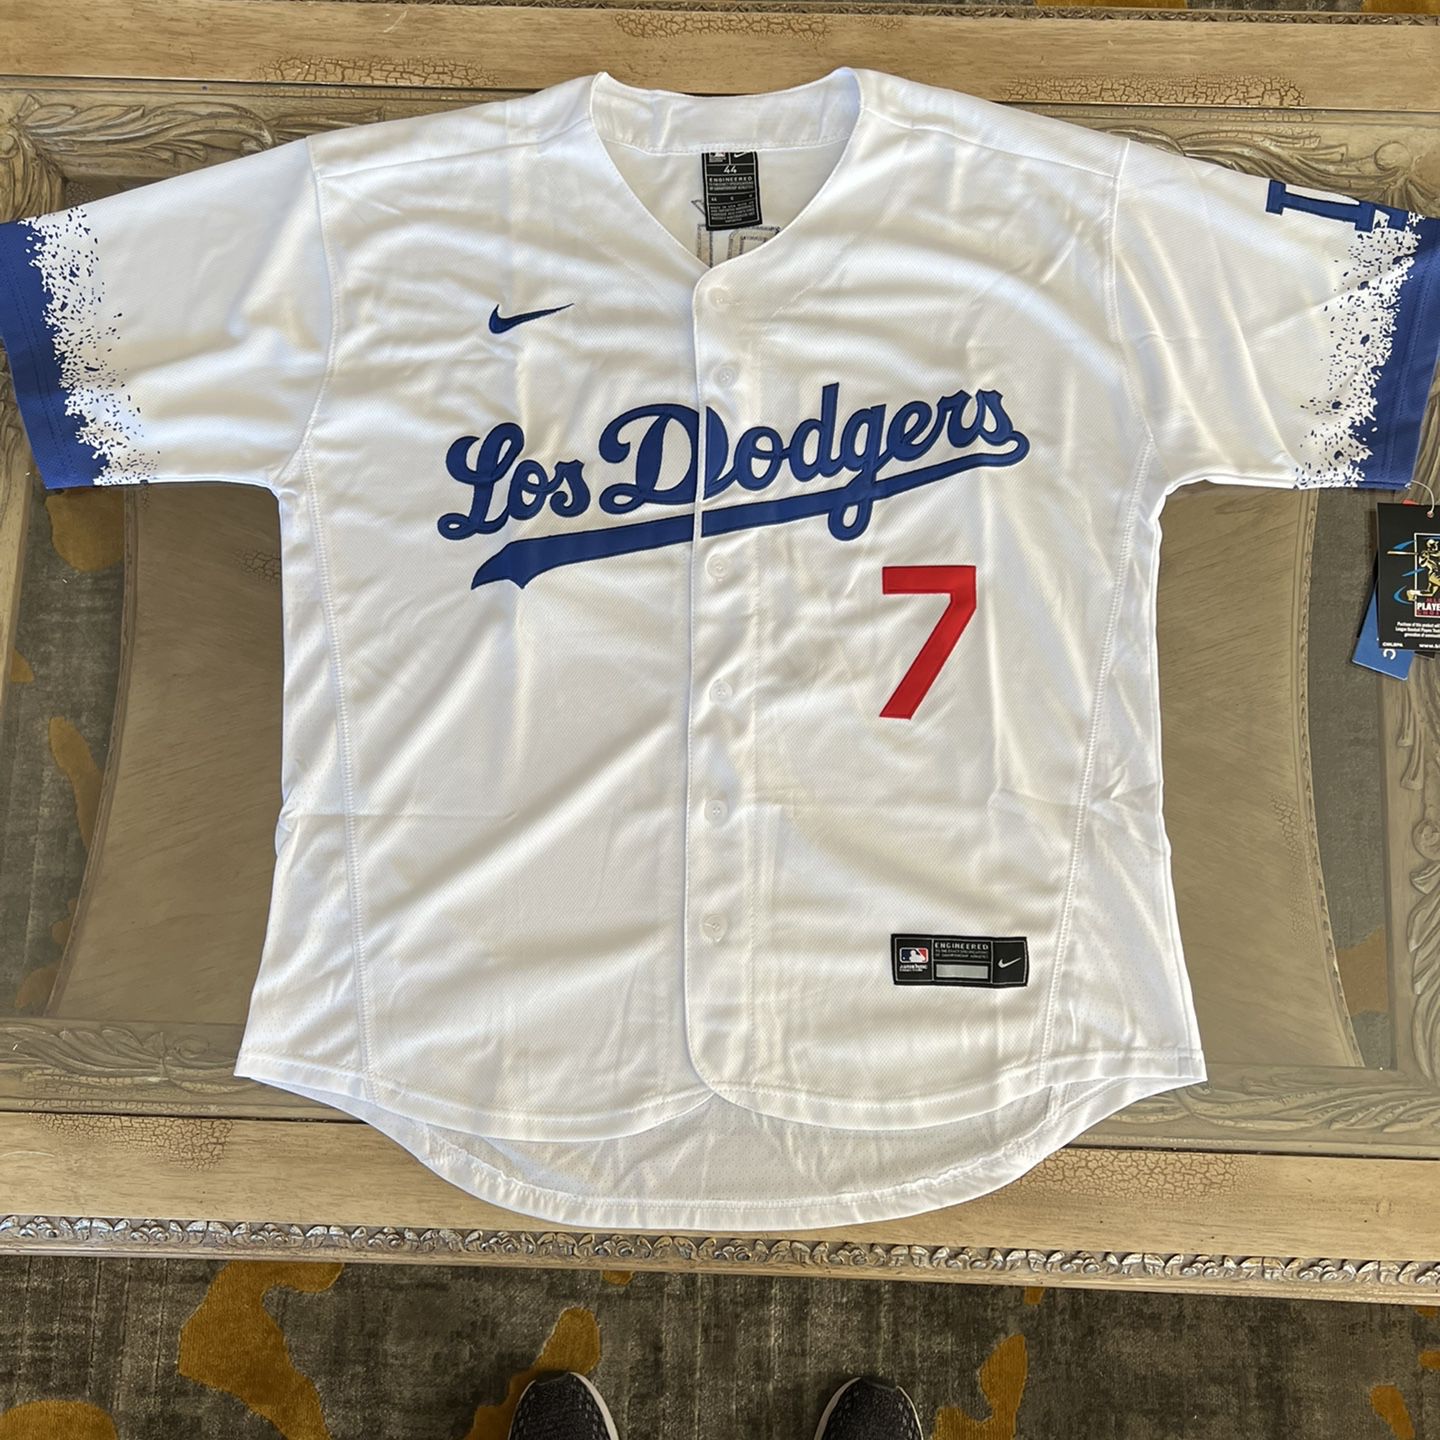 LA Los Angeles Dodgers Julio Urias World Series Champions Jersey Nike New  Size XL for Sale in South Gate, CA - OfferUp